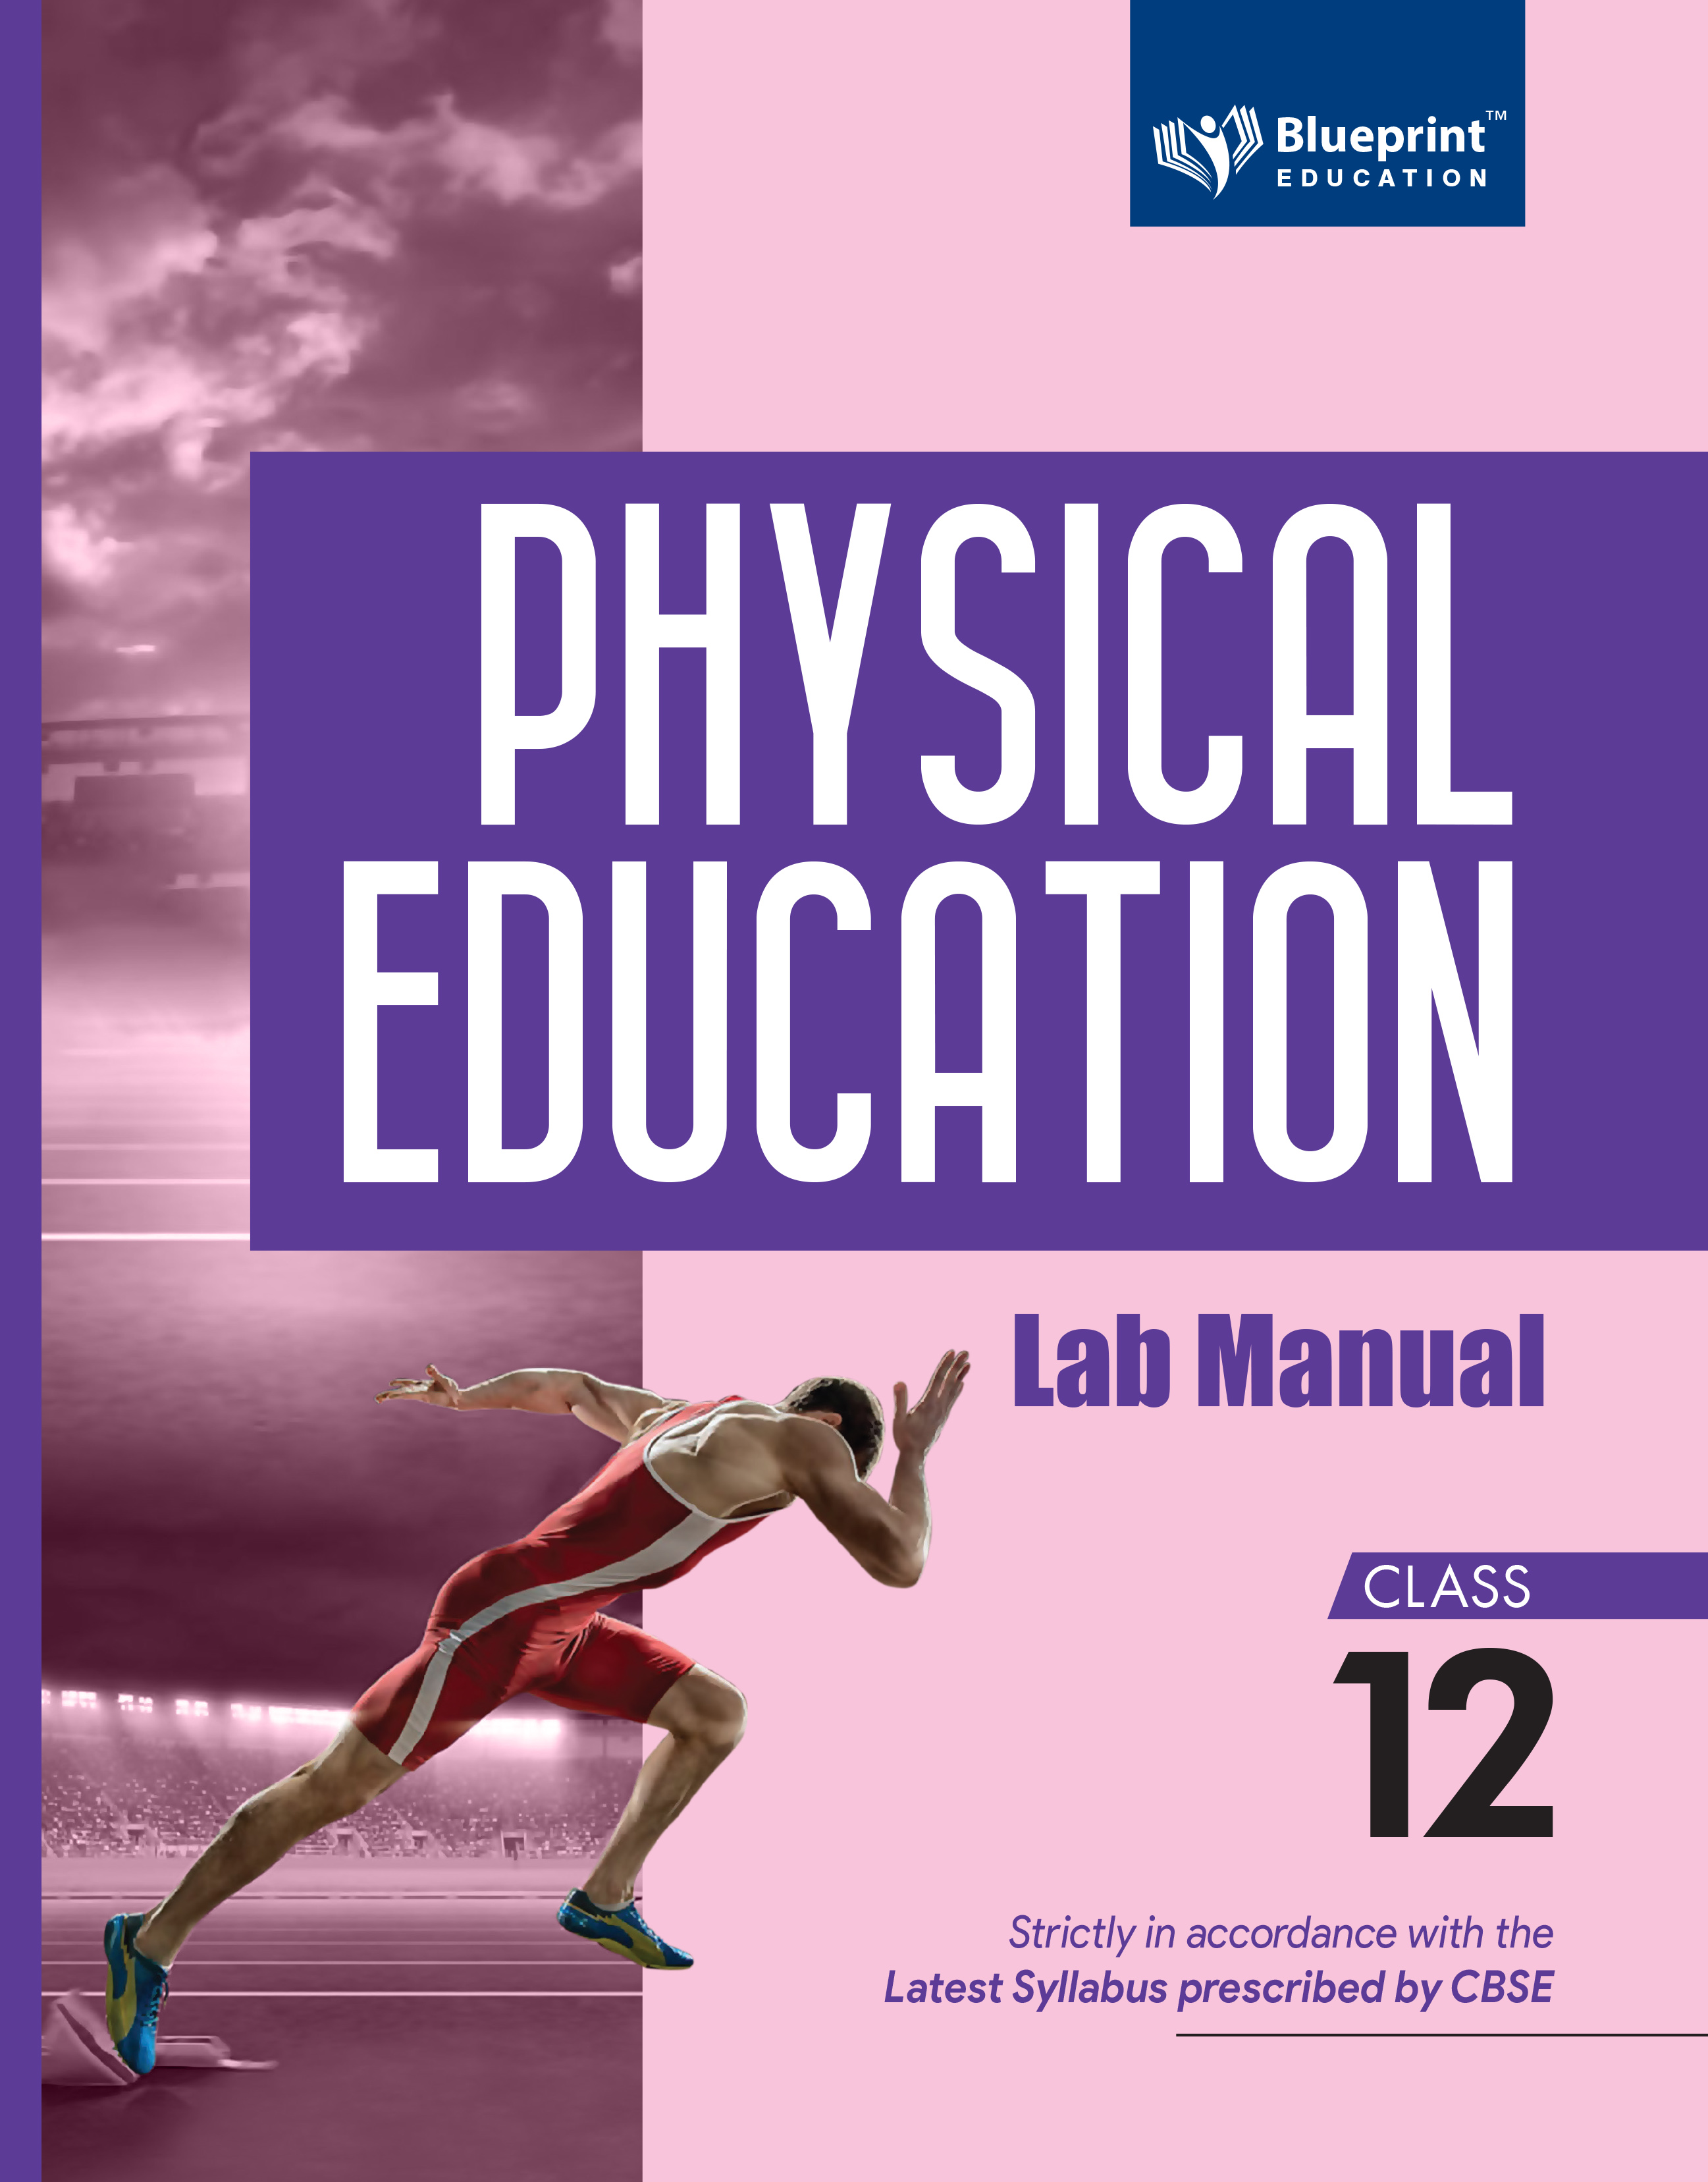 Physical Education Lab Manual Class 12 